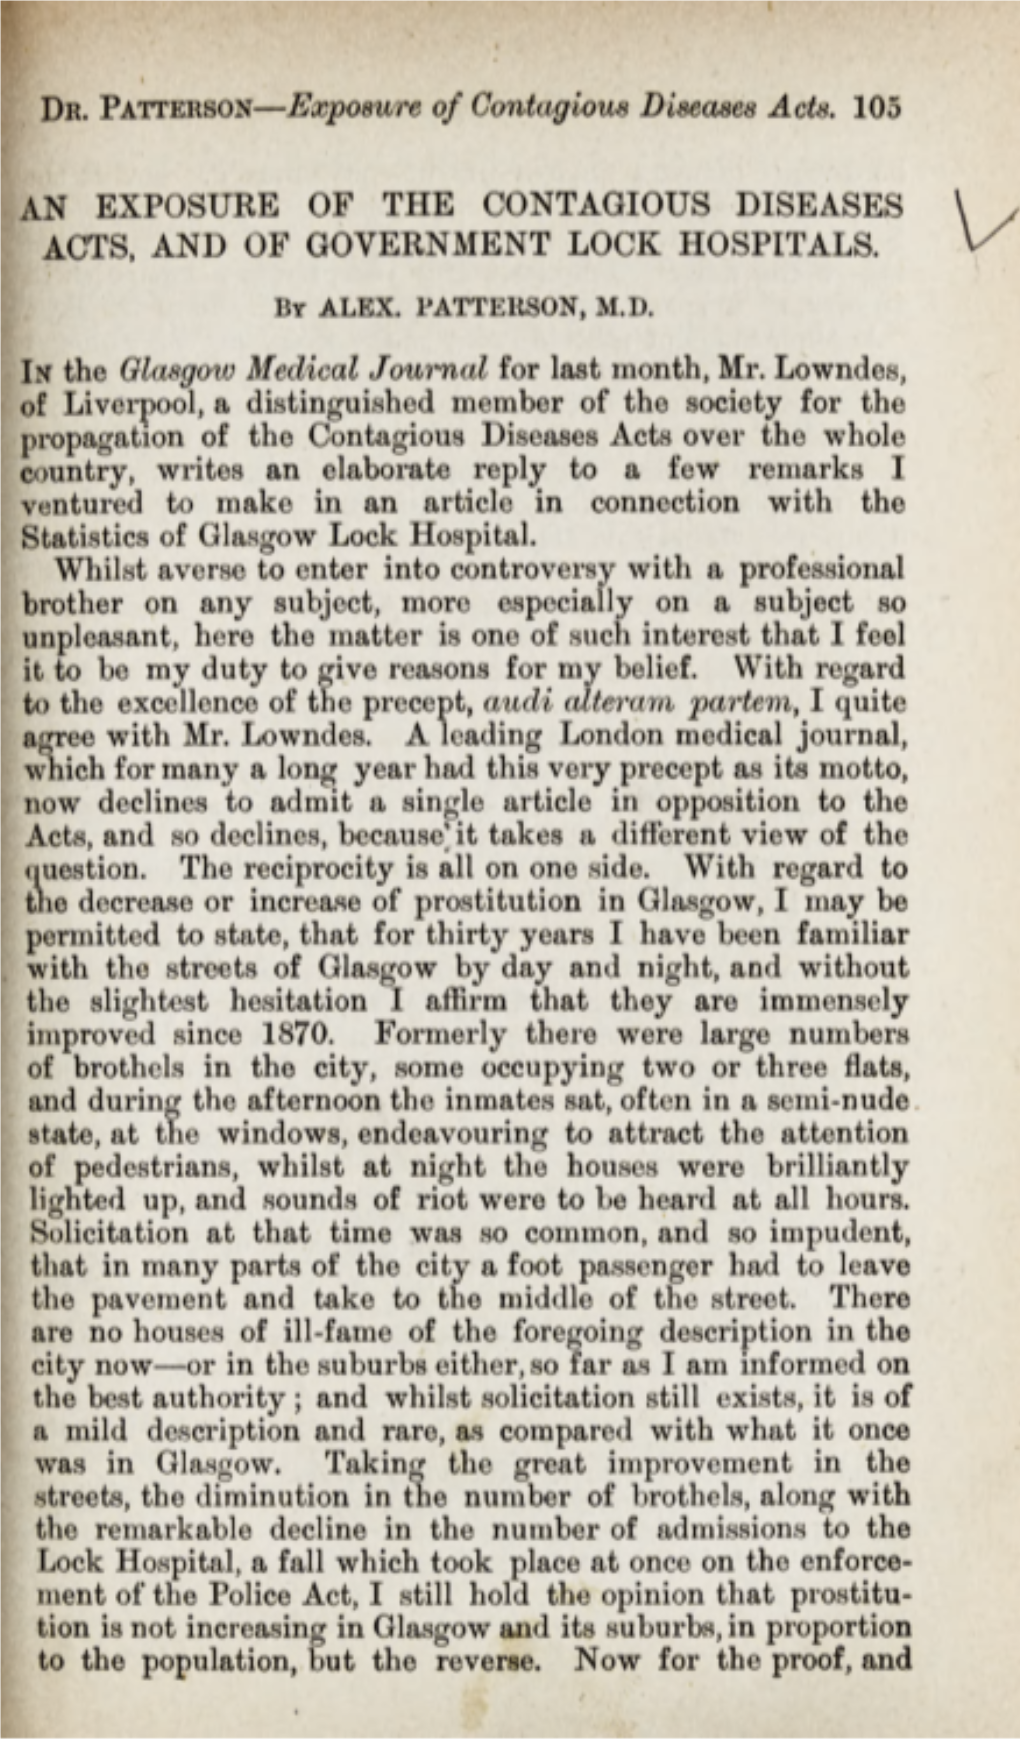 An Exposure of the Contagious Diseases Acts, and of Government Lock Hospitals